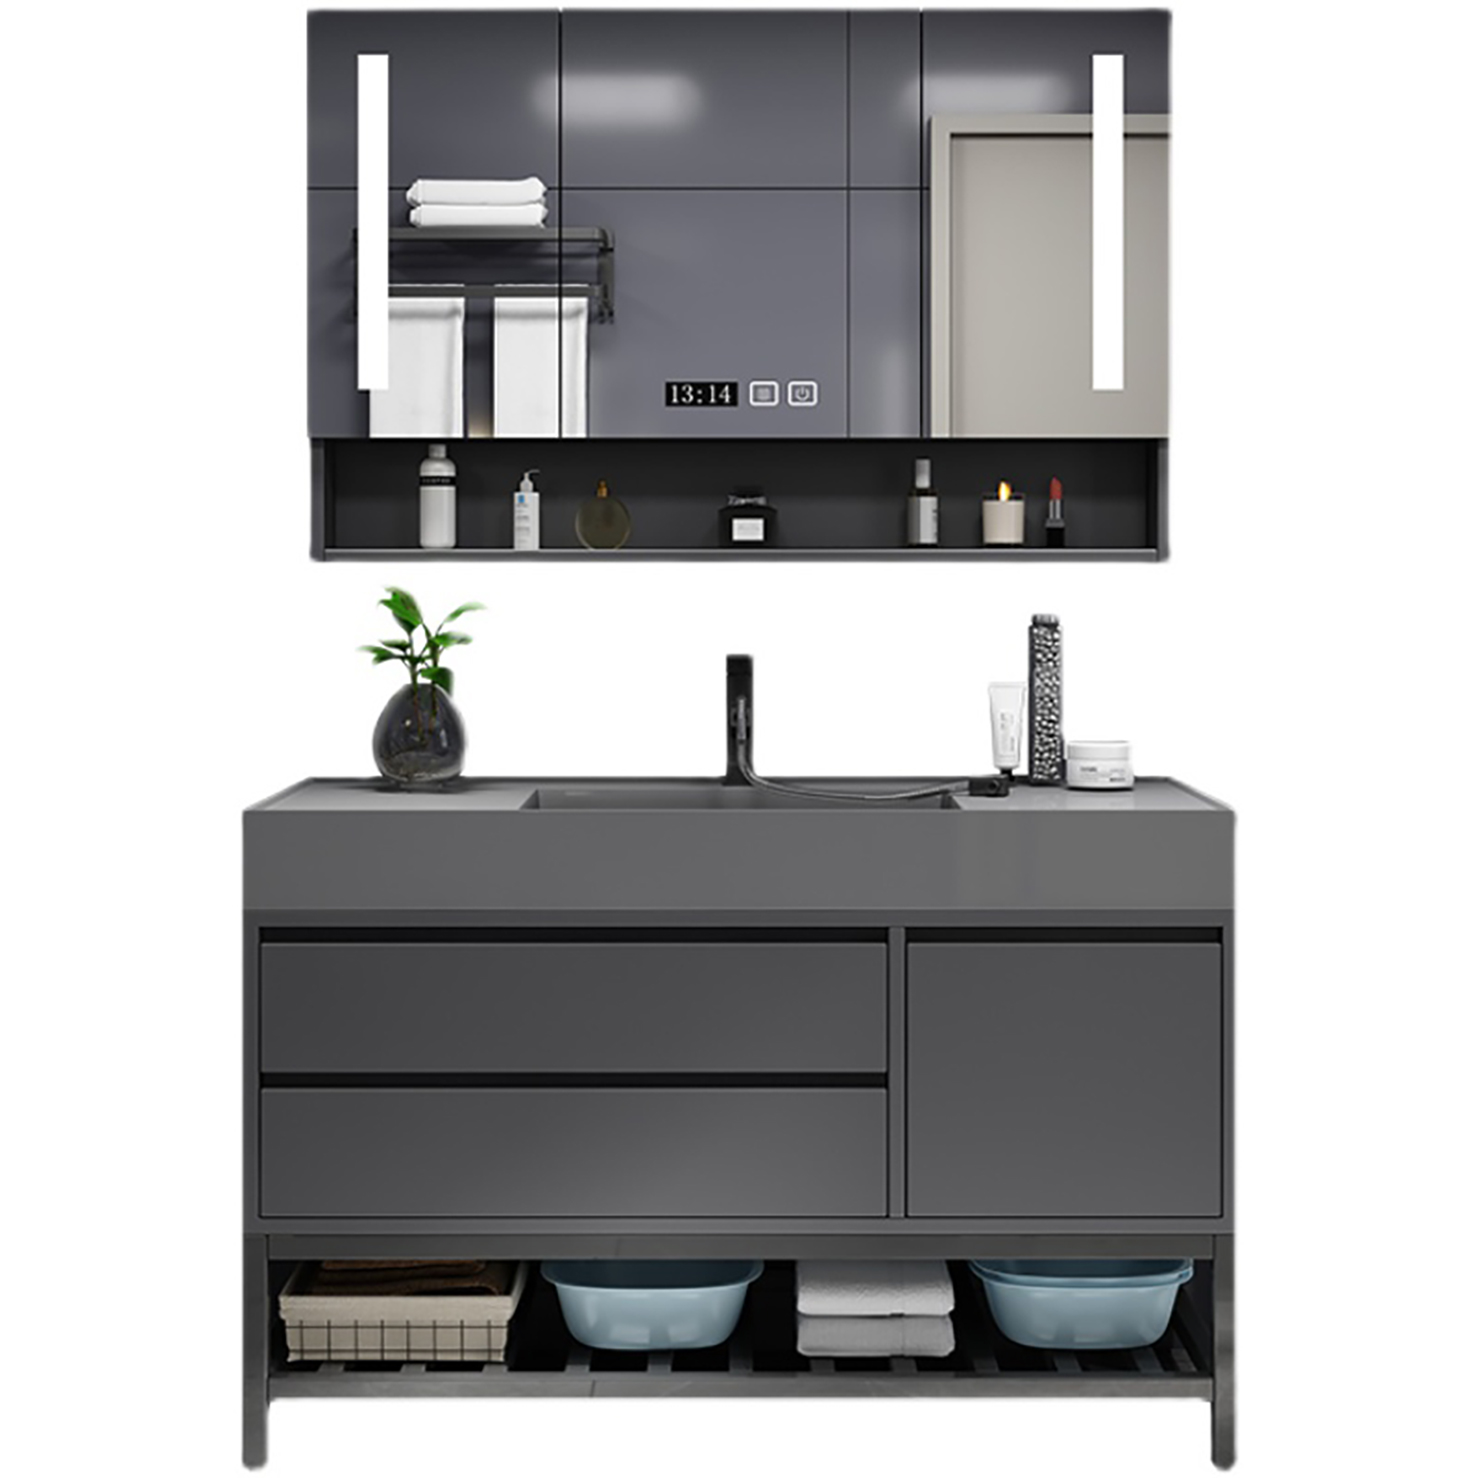 Large matte black wall-mounted bathroom cabinet 36 inches unique standing american bathroom vanity set (15)